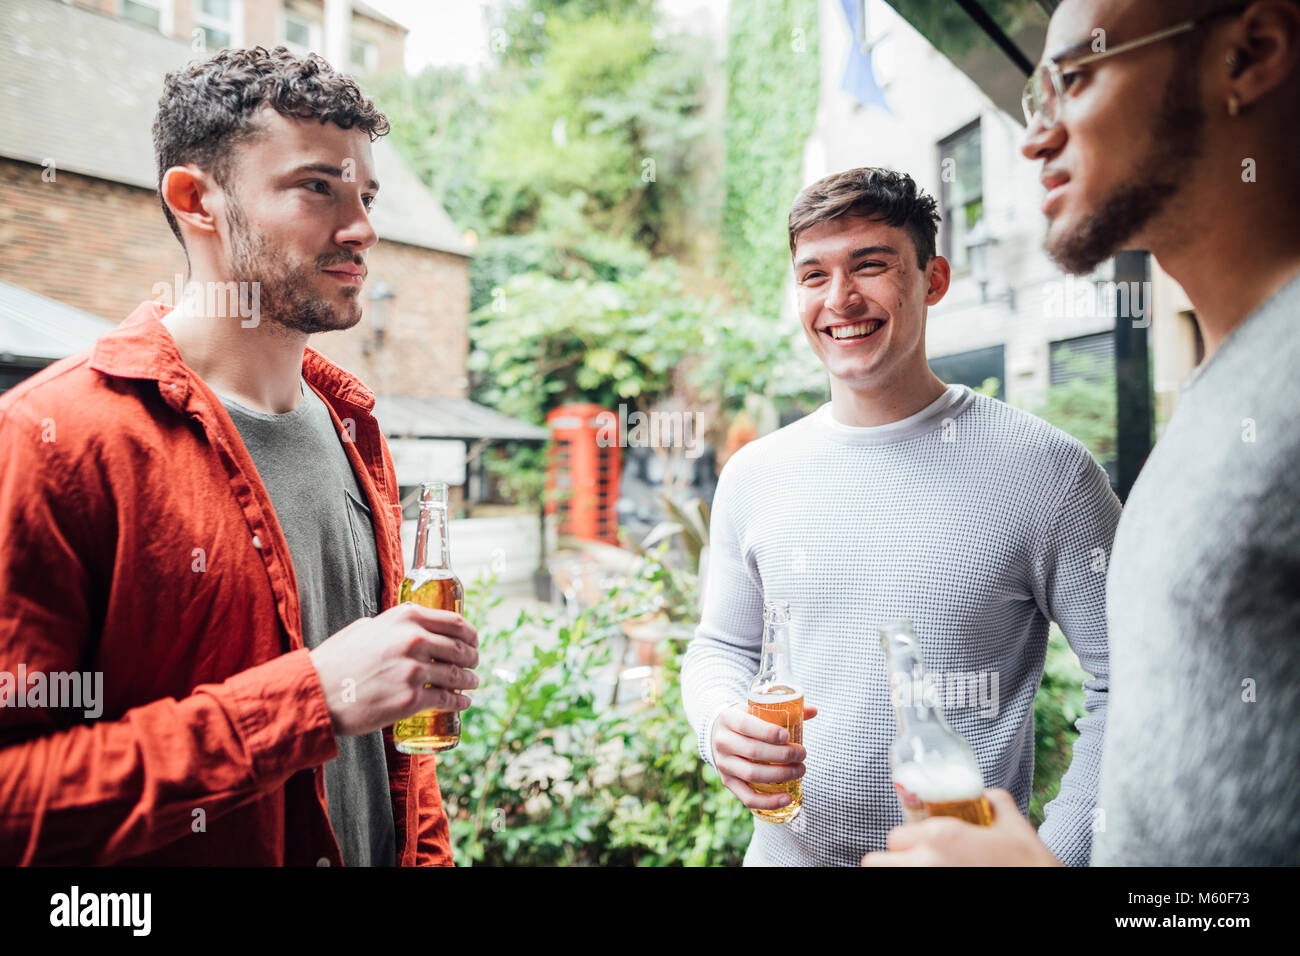 Three men are enjoying drinks together in the courtyard of a bar. They are talking and drinking bottles of beer. Stock Photo